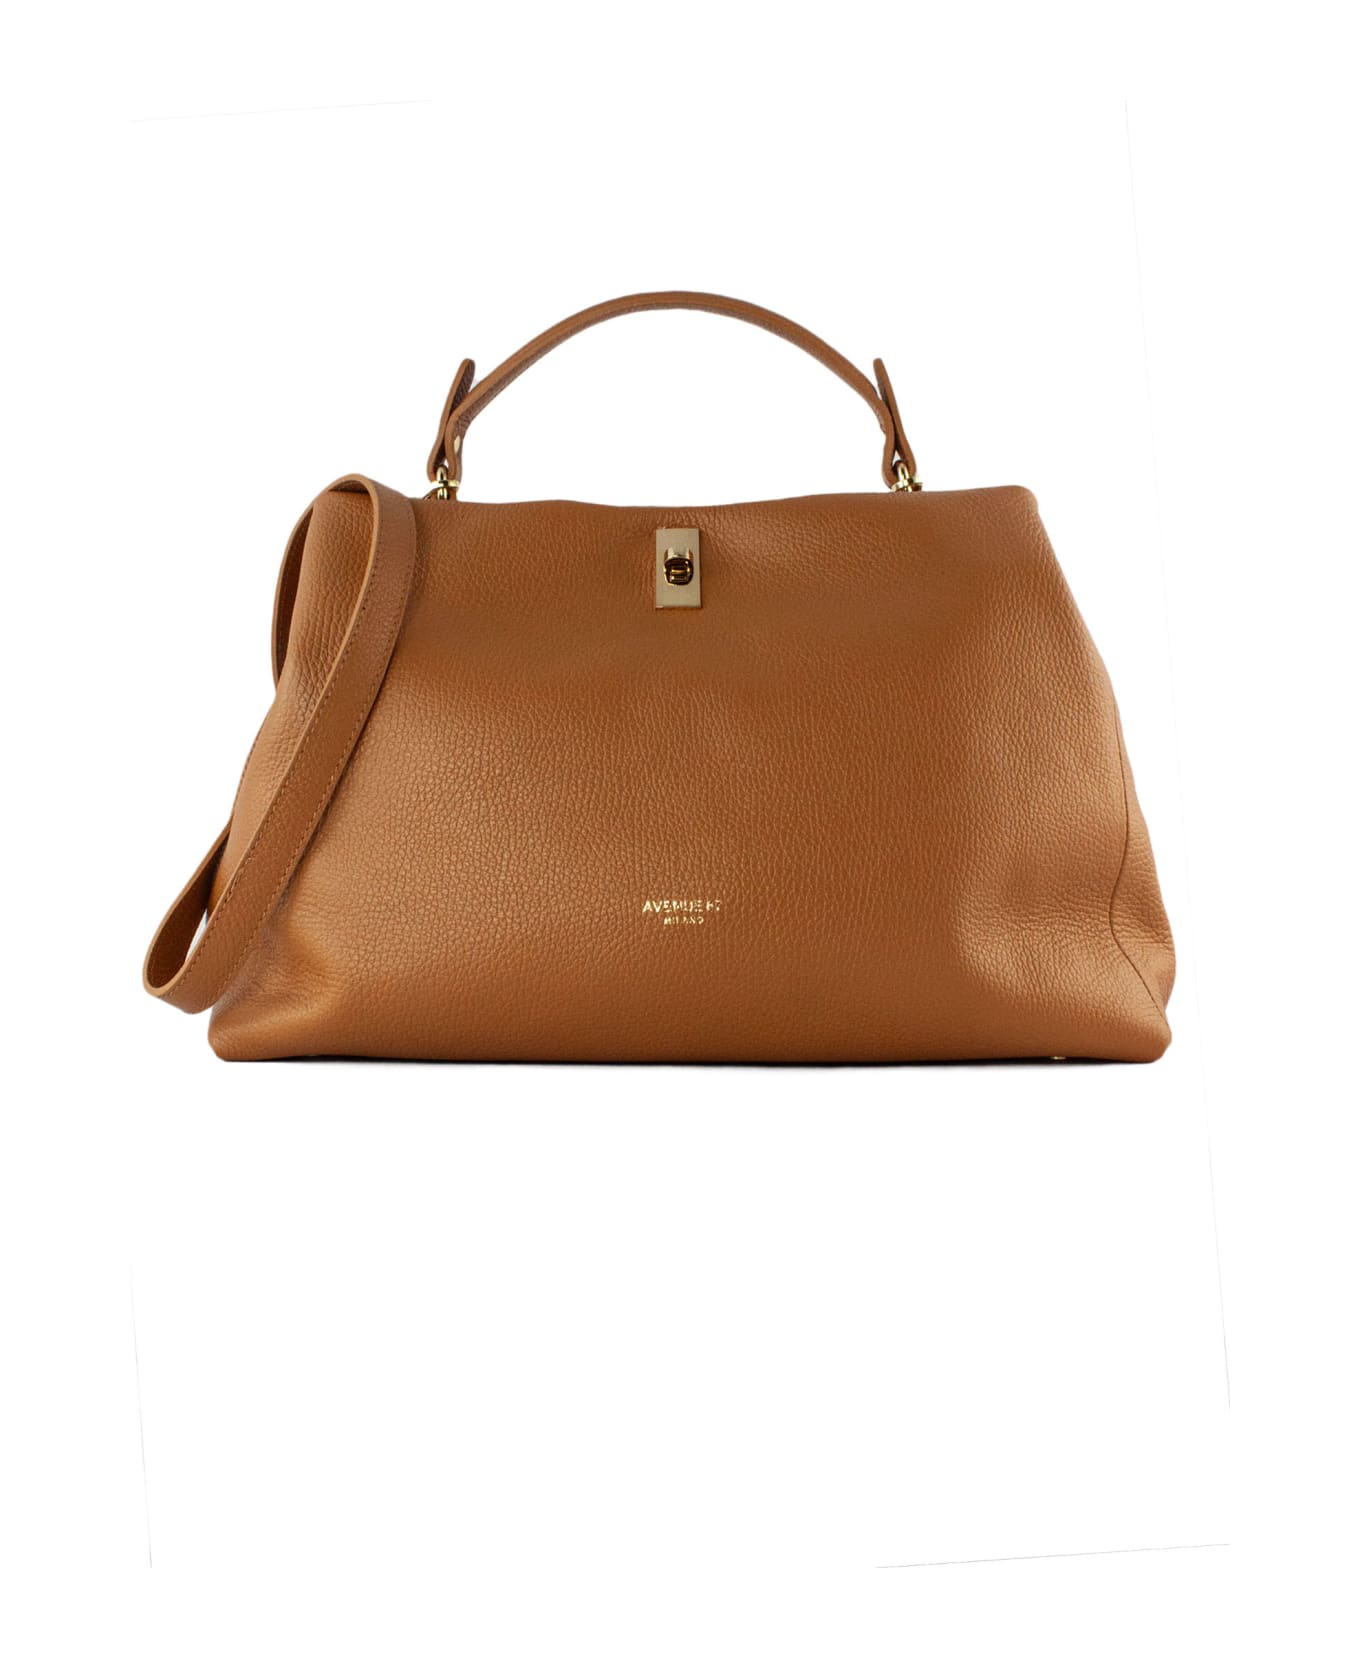 Avenue 67 Brown Grained Soft Leather Bag - Brown